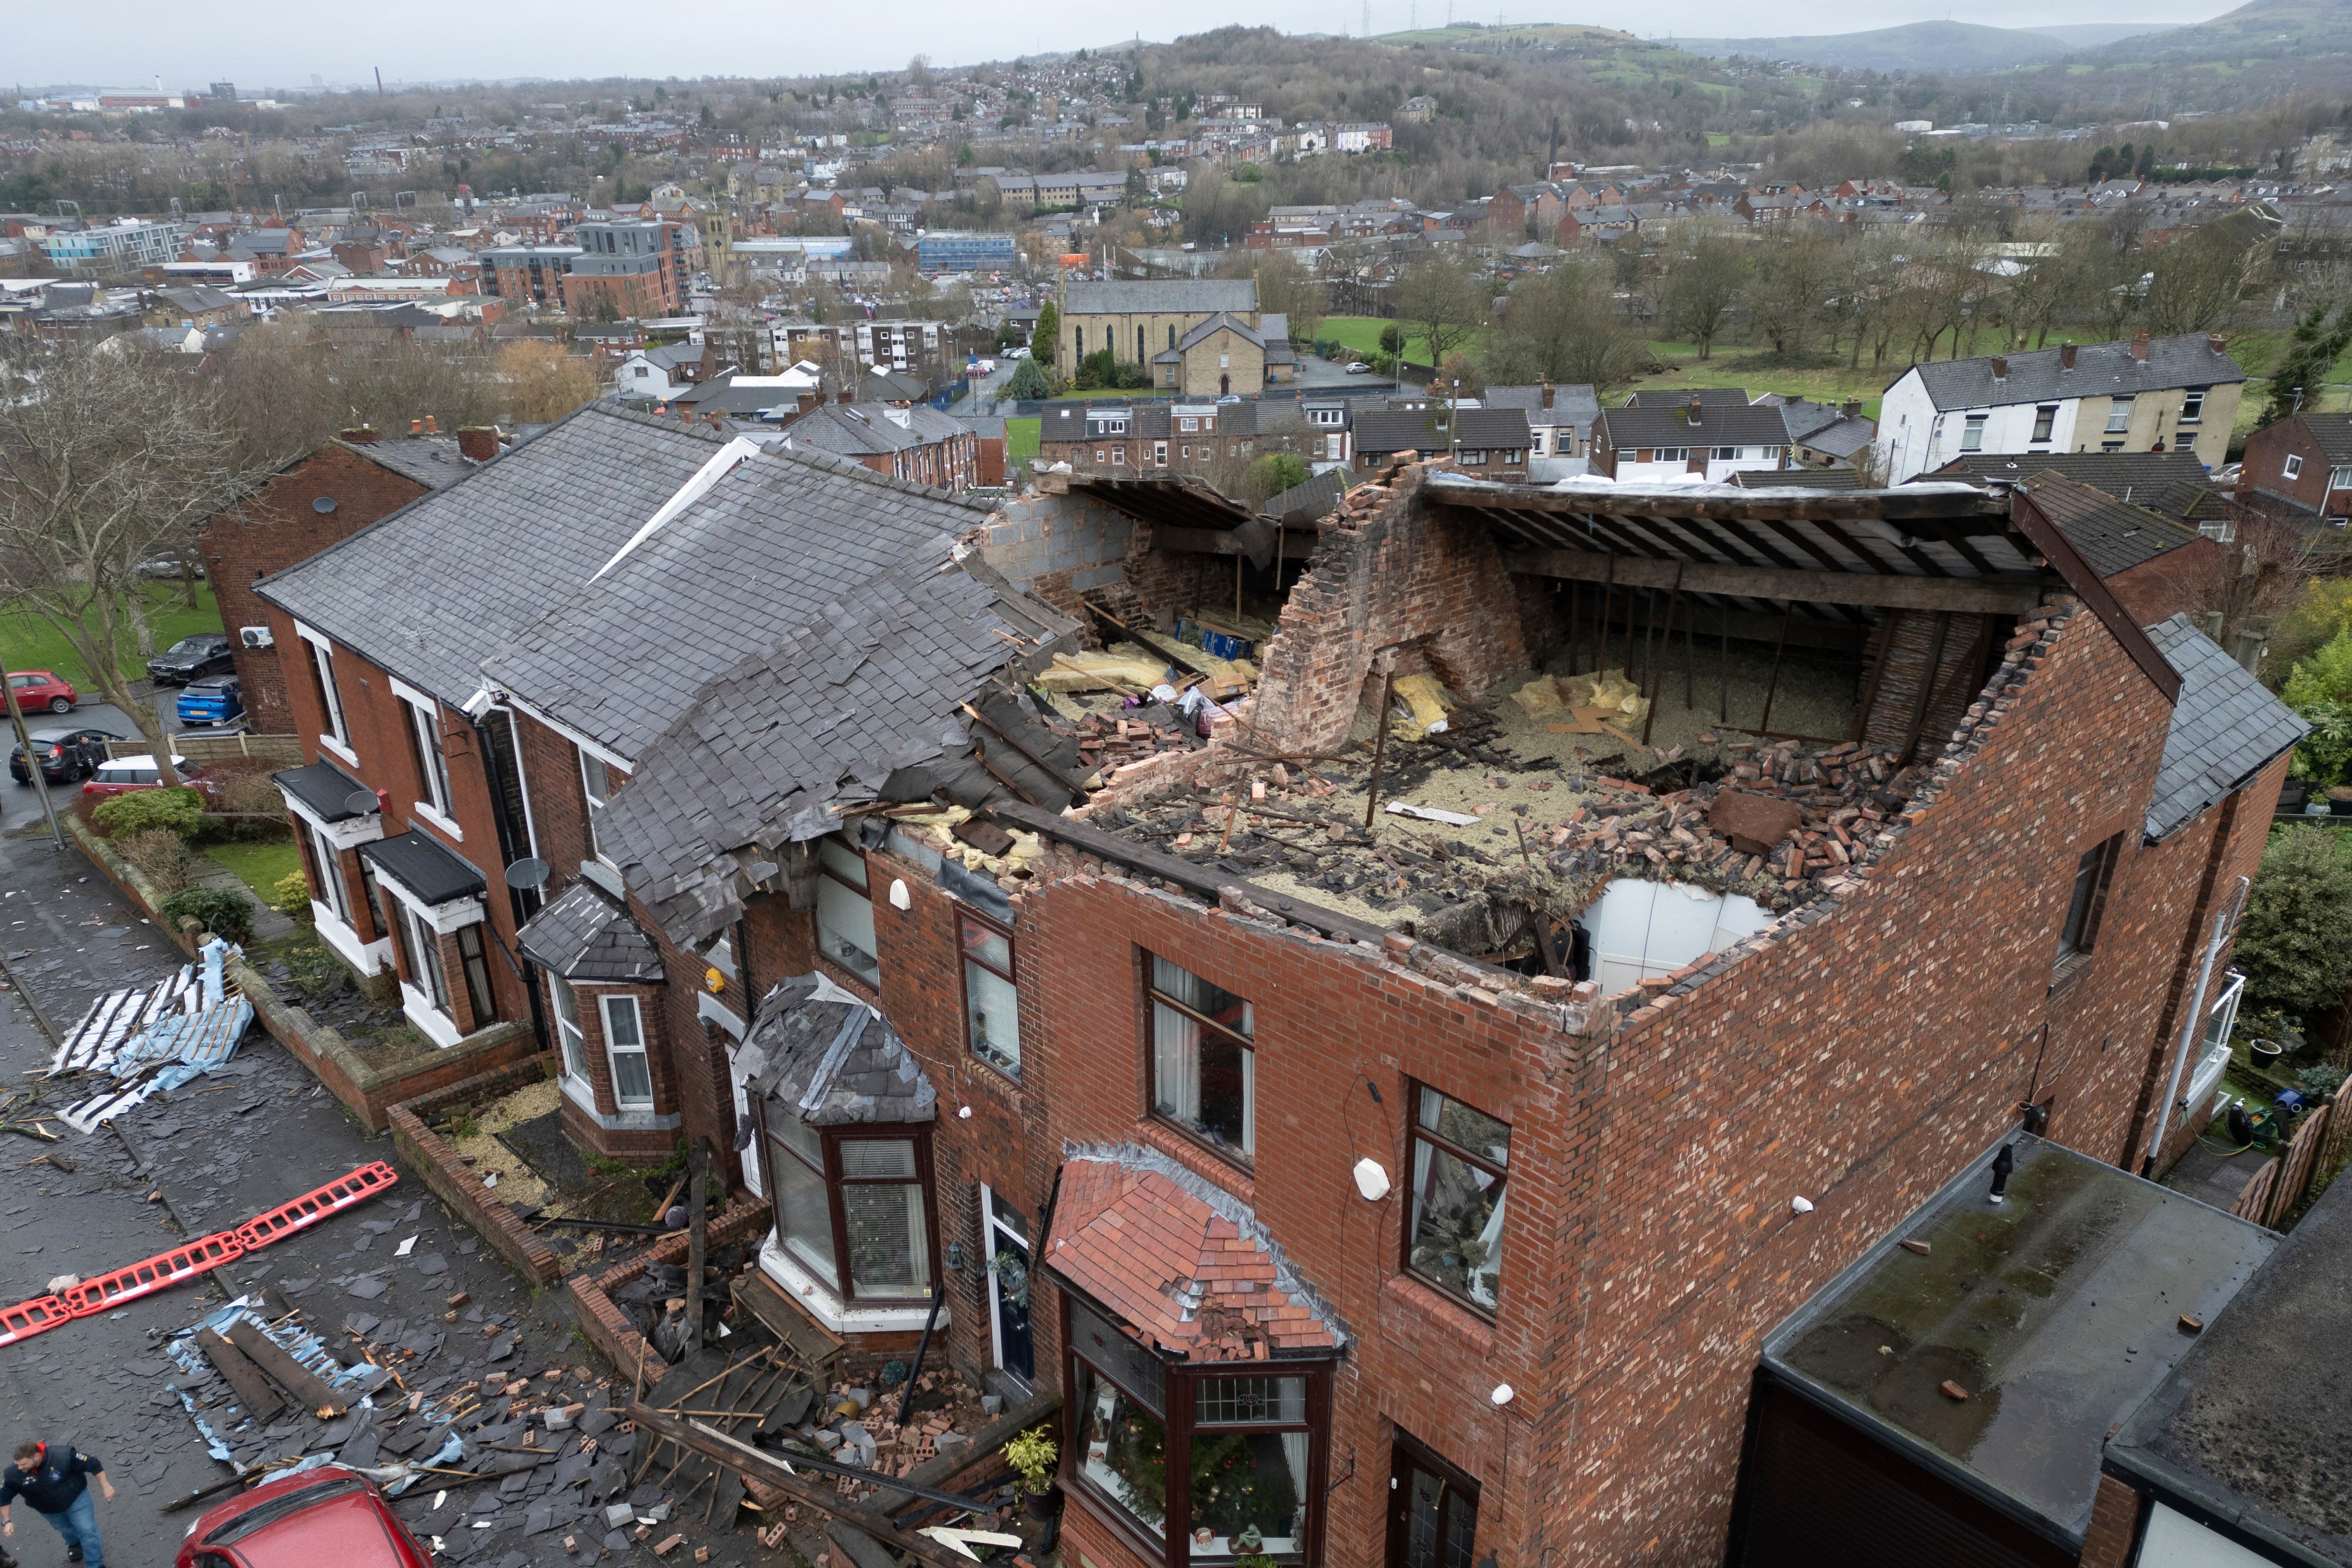 The ‘localised tornado’ ripped off roofs and brought down walls in Stalybridge